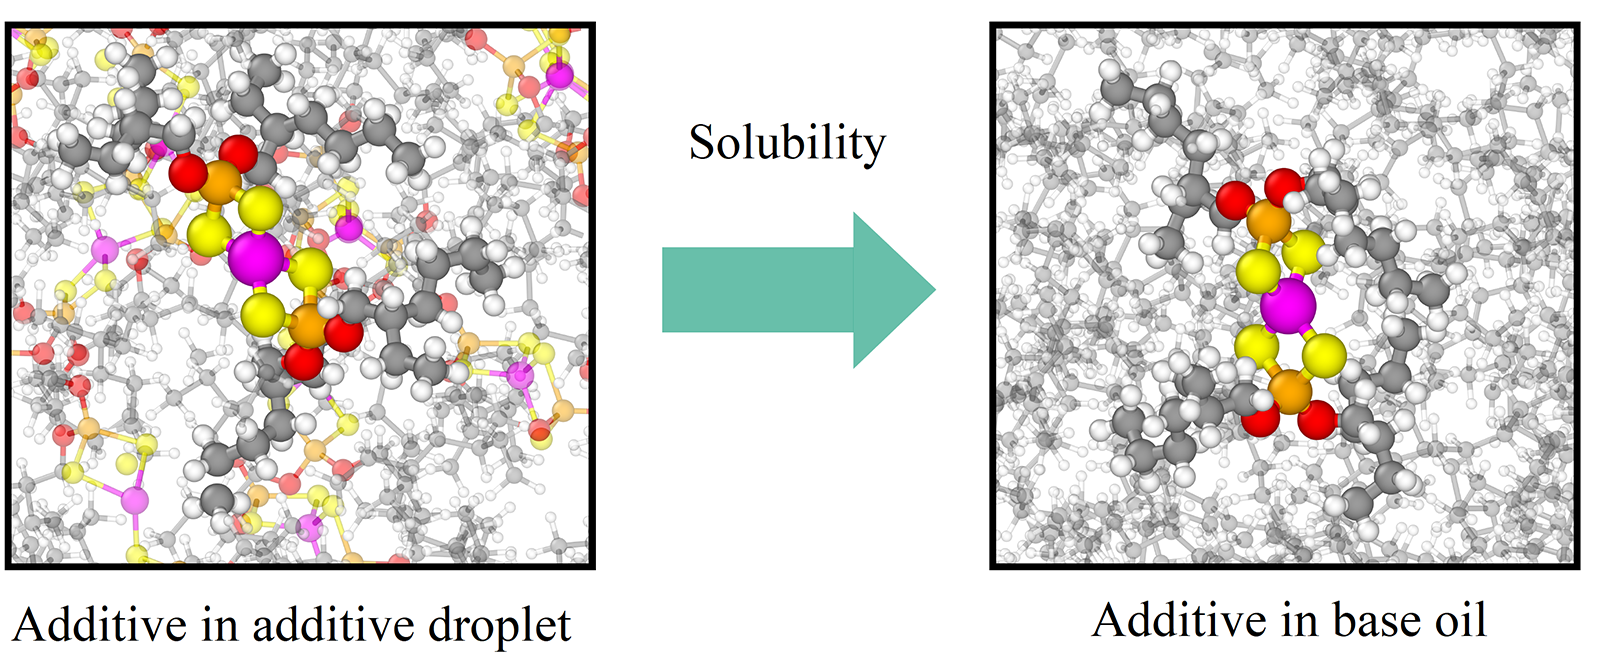 Atomistic calculation of the solubility of additives in the virtual lubricant lab